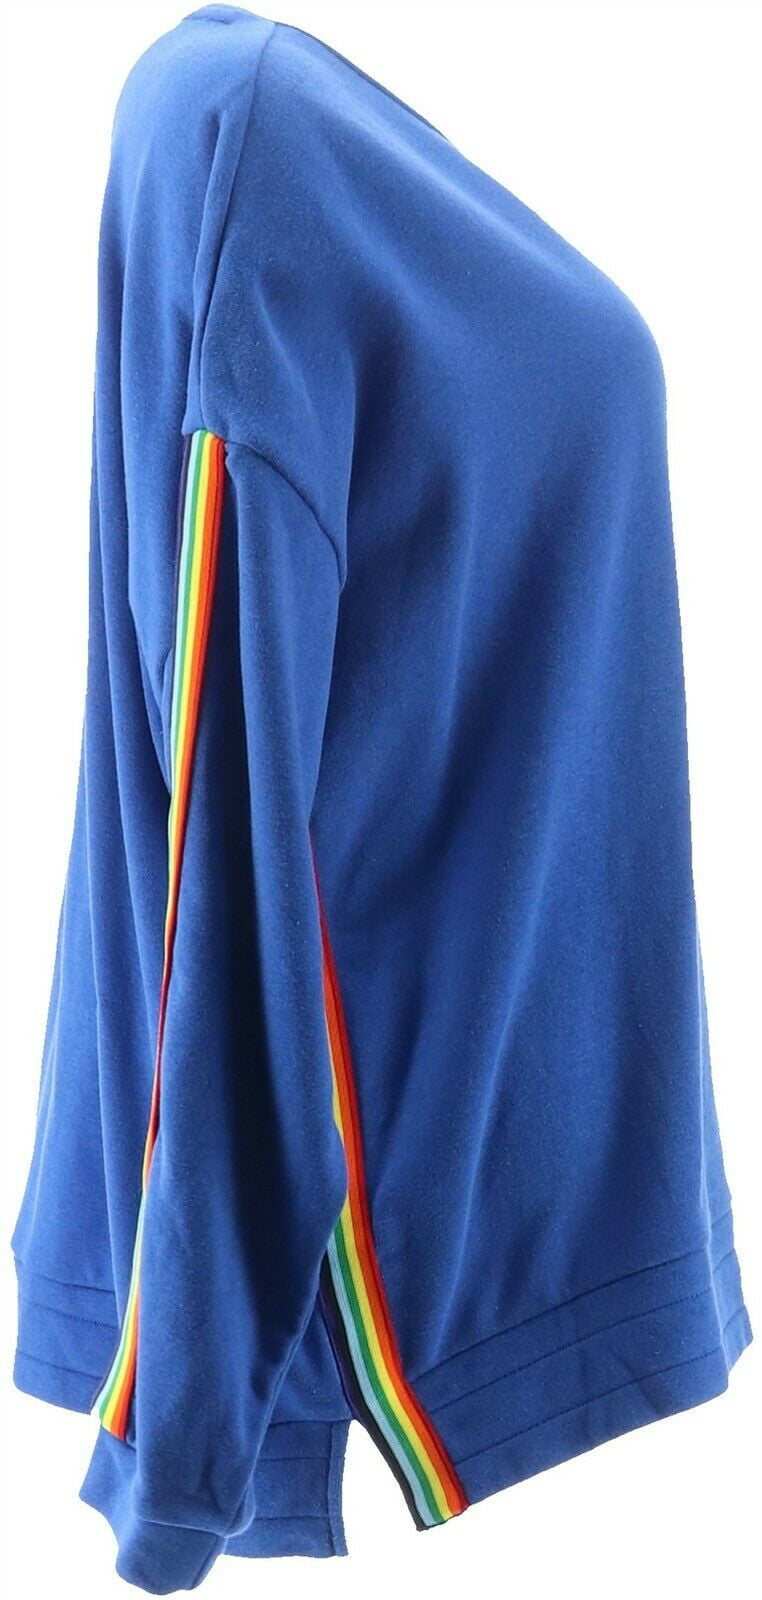 Tracy Anderson GILI French Terry Pullover Bright Blue 1X NEW A354975 